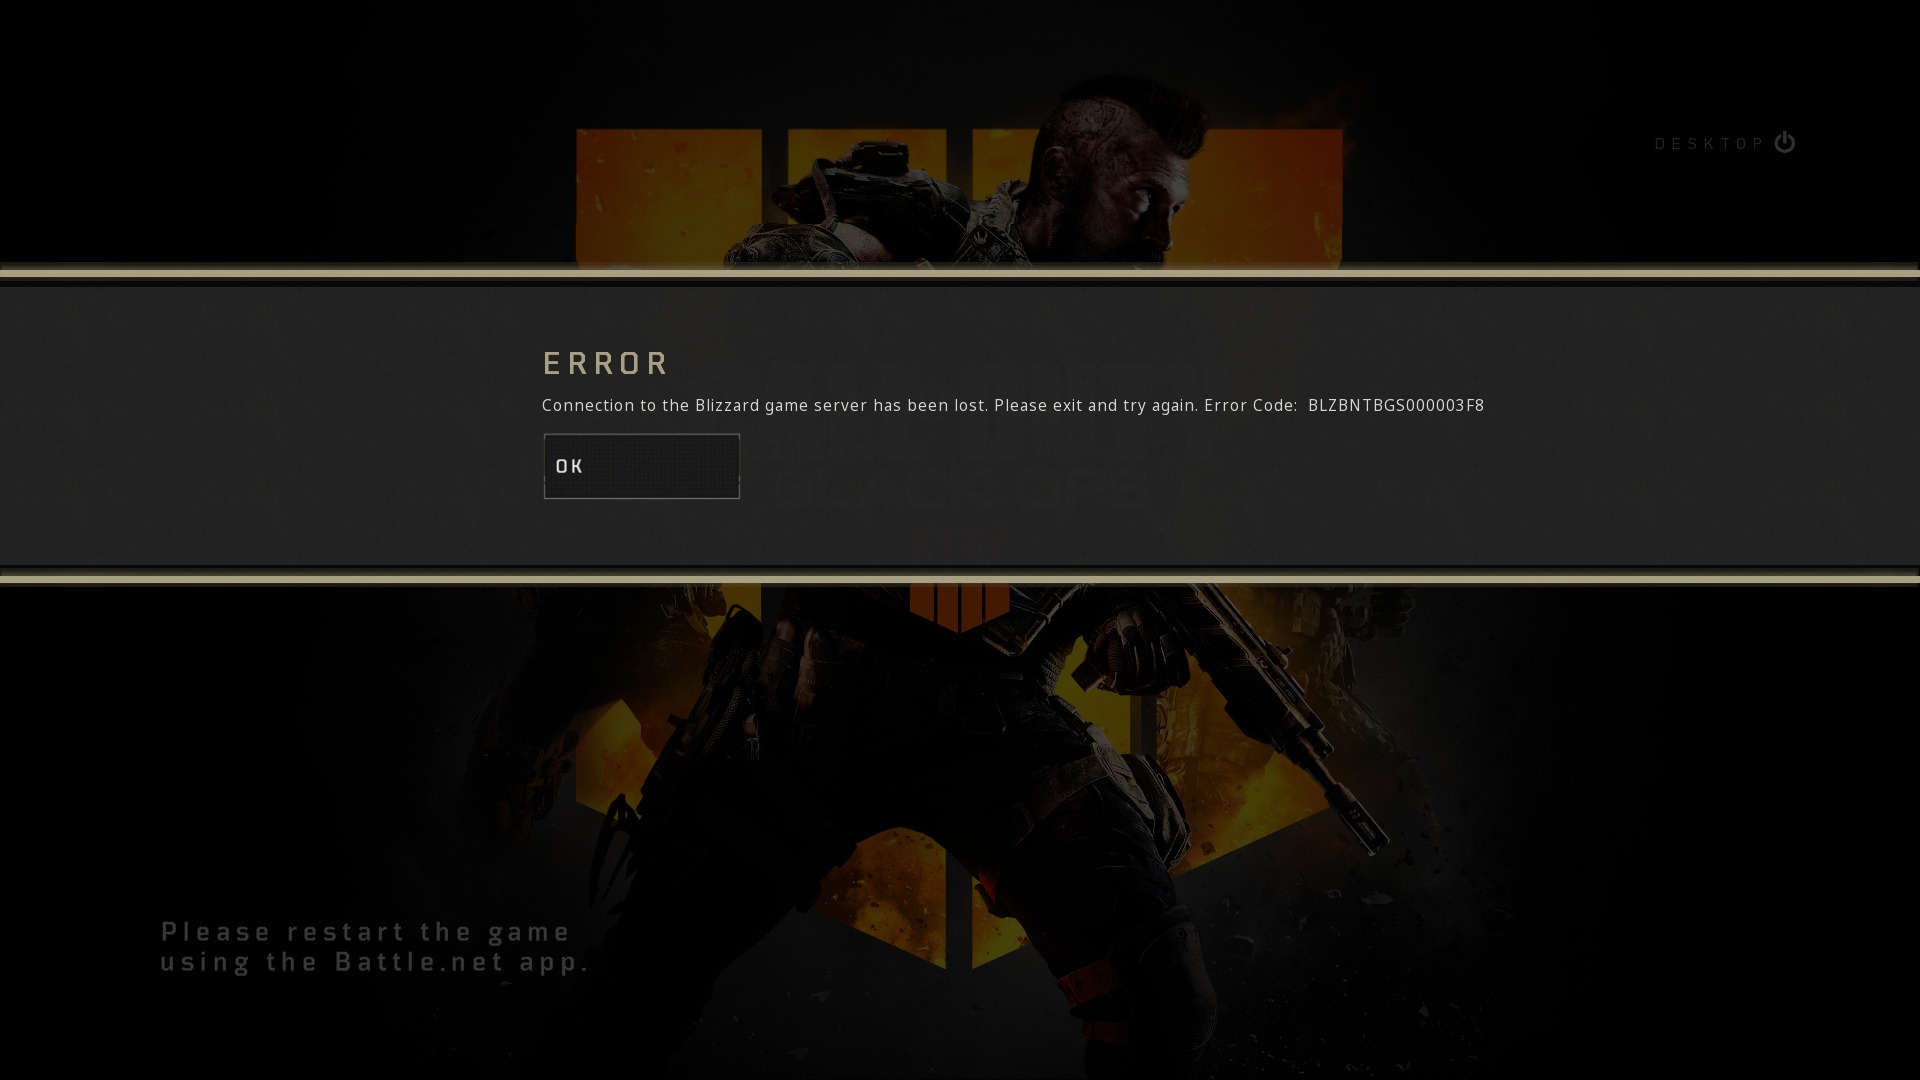 Cod Black Ops 4 Connection Lost Error How To Fix Blzbntbgsf8